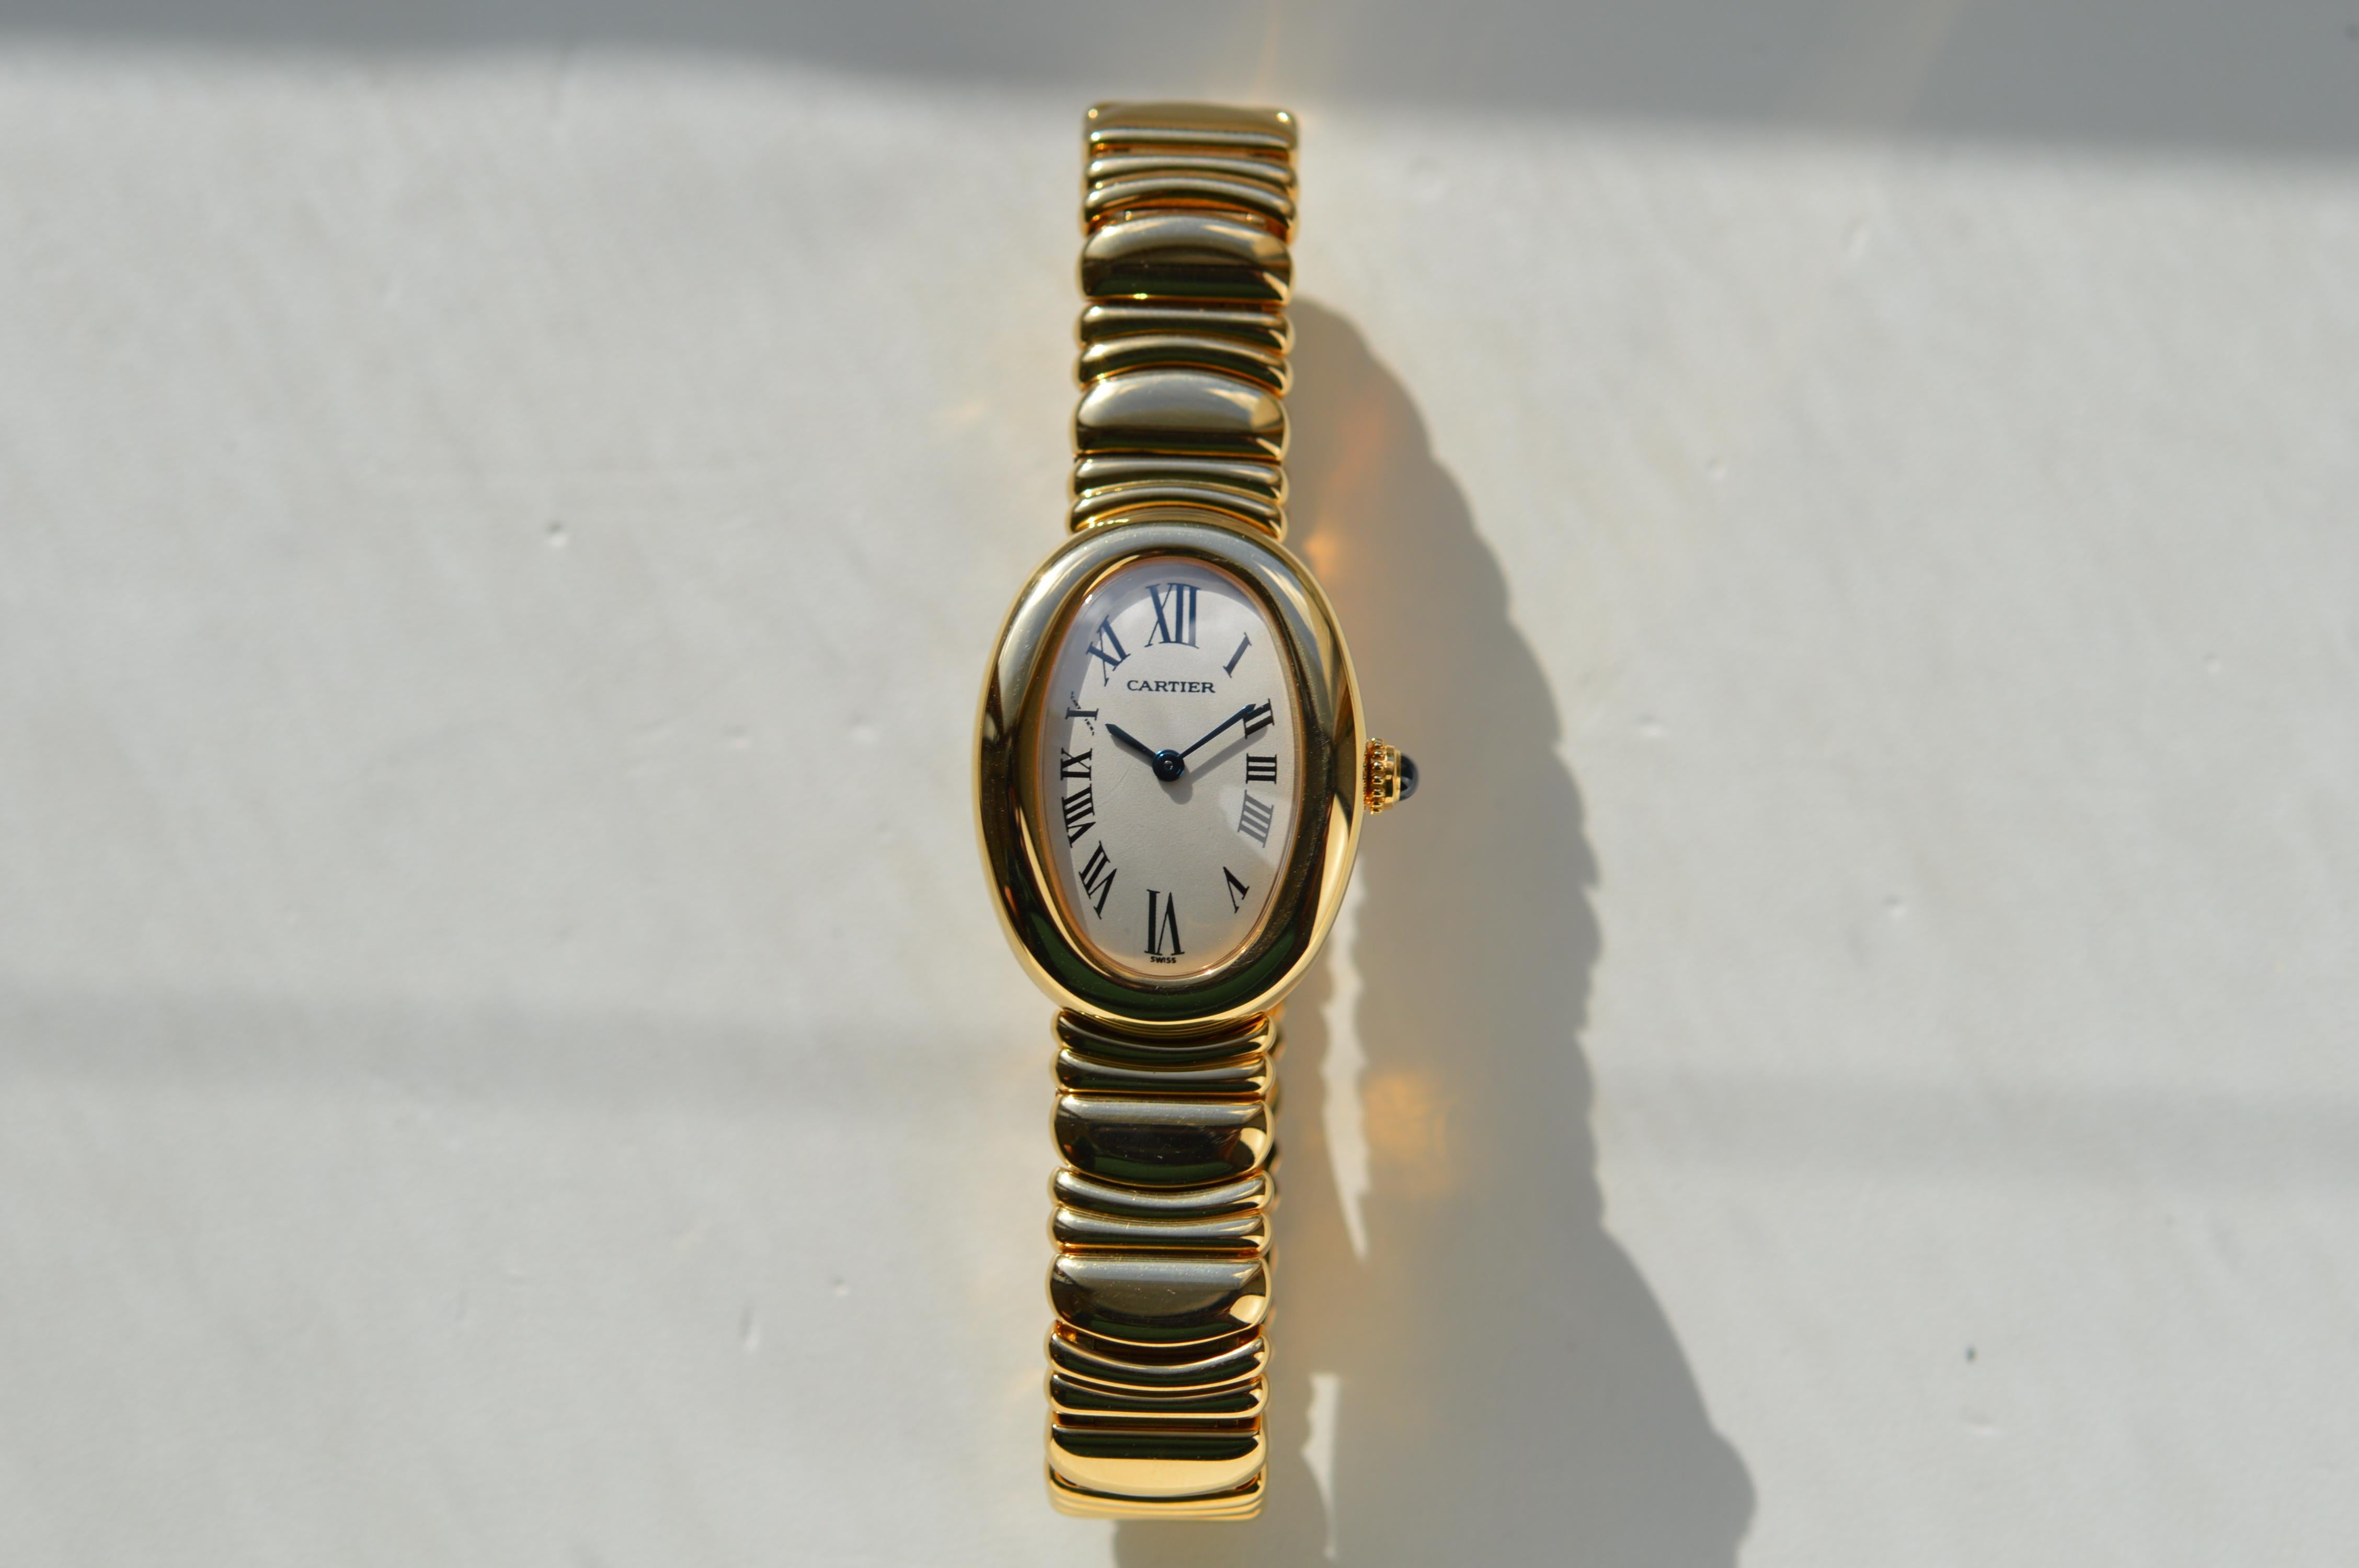 Cartier Baignoire 1920 Full 18K Yellow Gold
Reference n° W15045D8
31mm X 23mm
18K Yellow Gold Case and Bracelet
Blue Sapphire Cabbuchon Crown
Cream/White Dial
Blued Steel Sword Shaped Hands
Quartz Movement
Water Resistant 3ATM - 30M - 100 FT
New Old